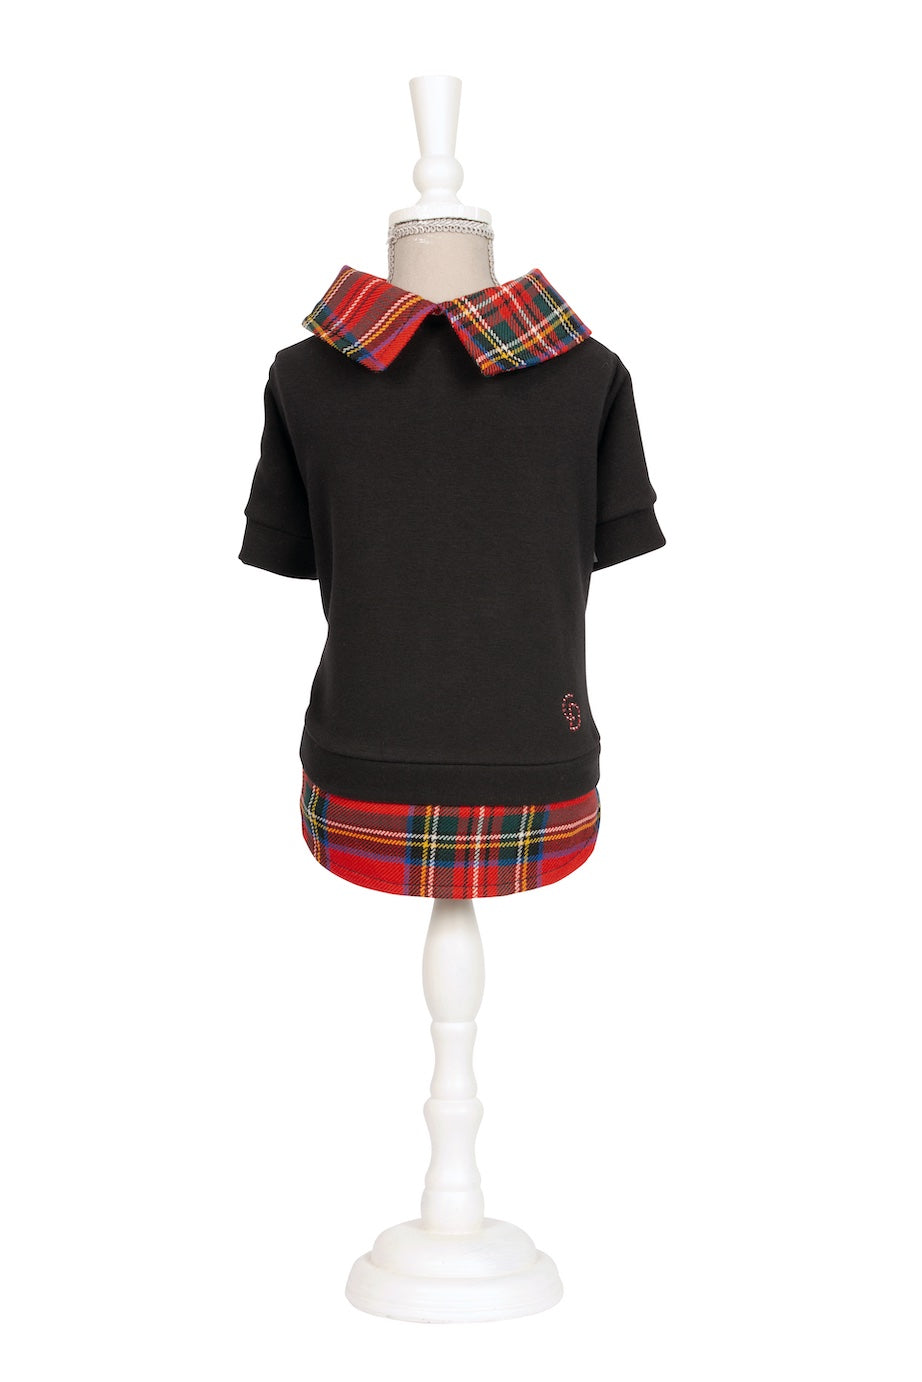 Blade - Sweatshirt for dogs in cotton and tartan patterned pure virgin wool details.